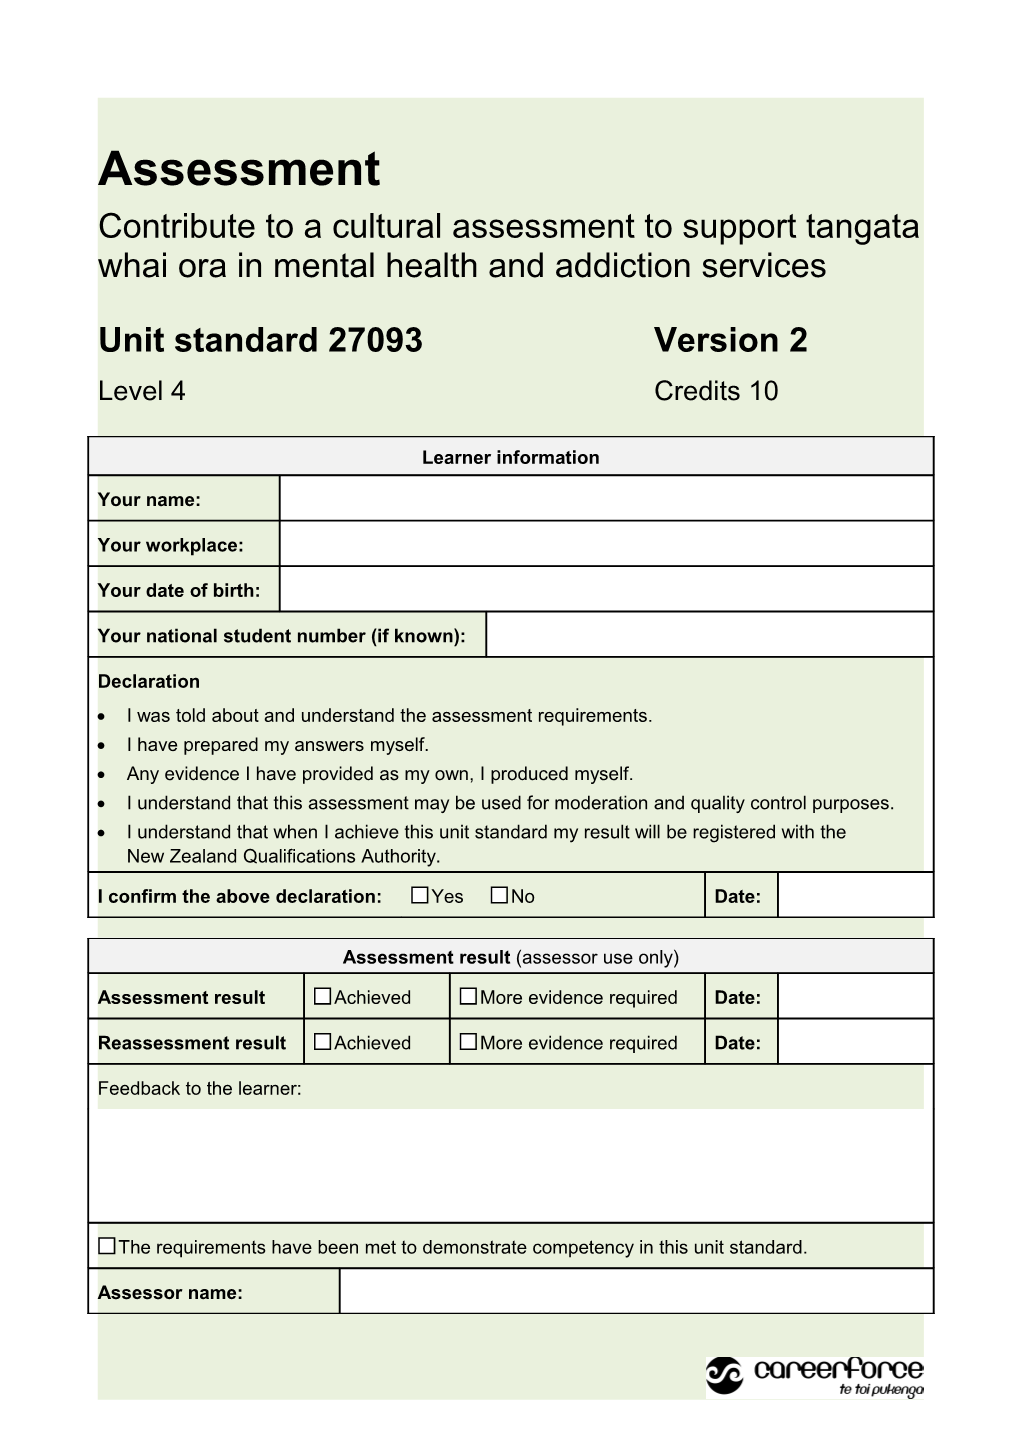 Contribute to a Cultural Assessment to Support Tangata Whai Ora in Mental Health and Addiction